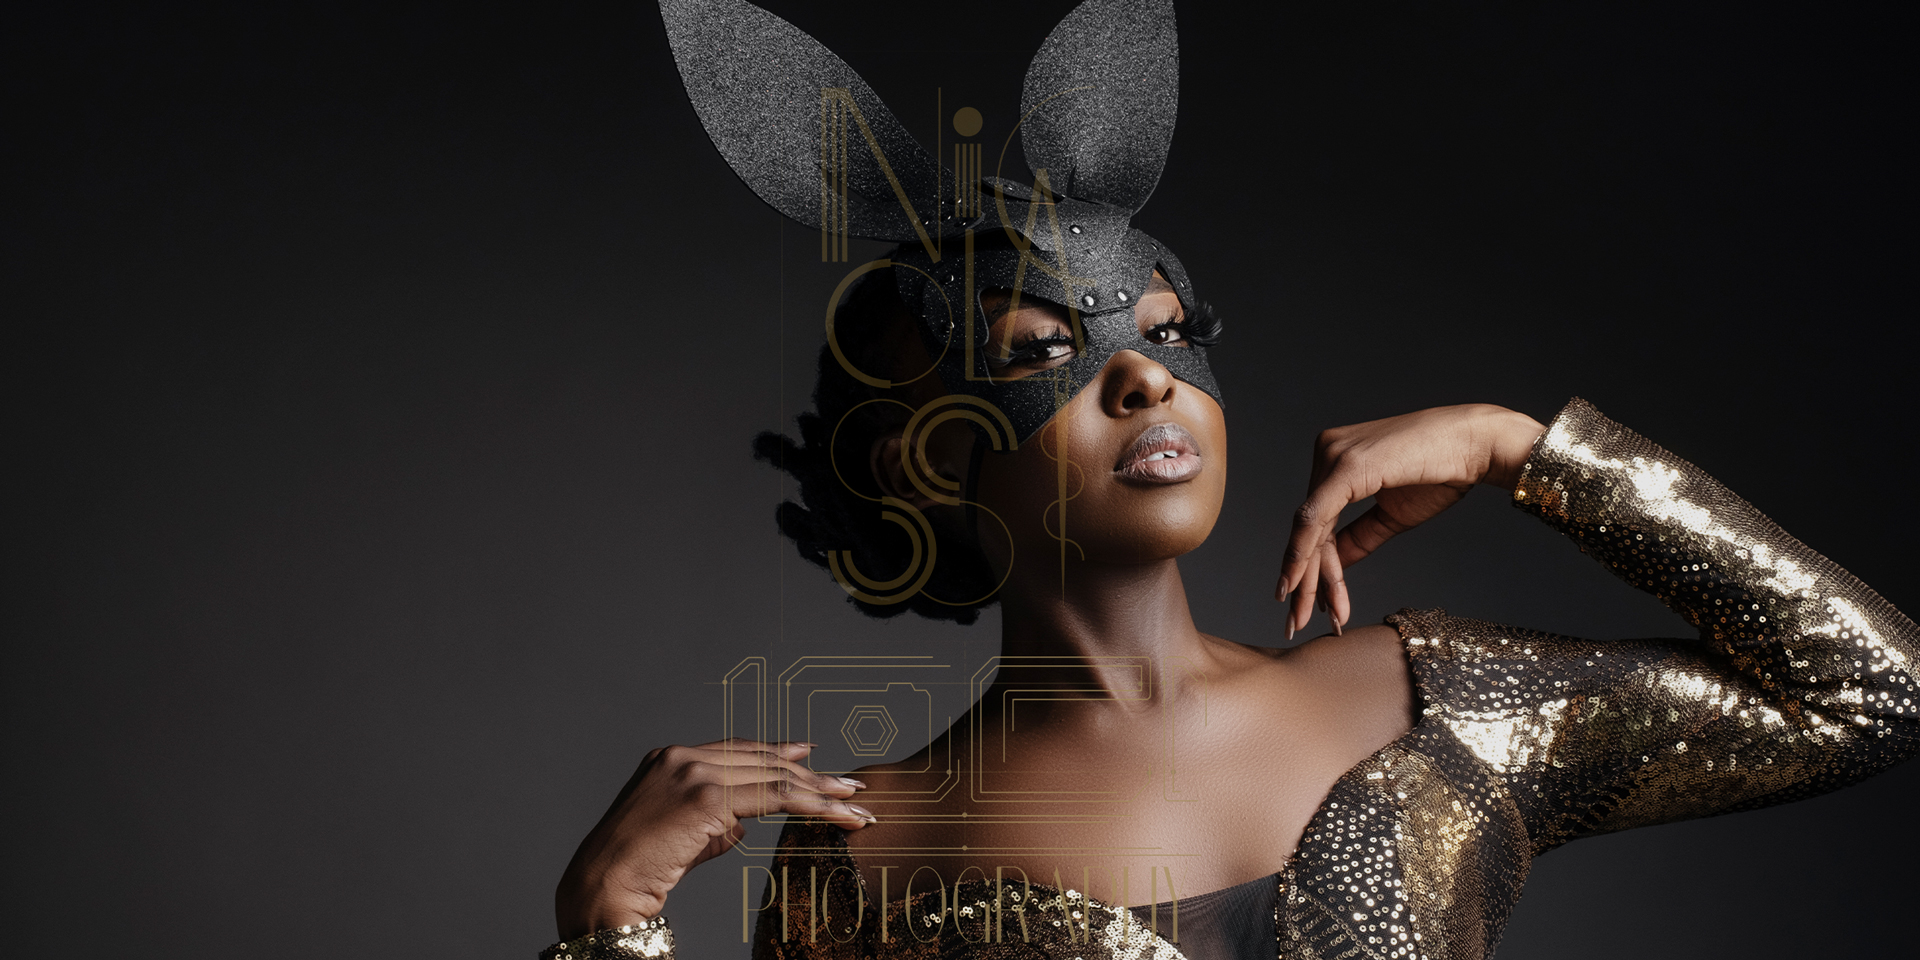 A black bunny mask from Nicolassi